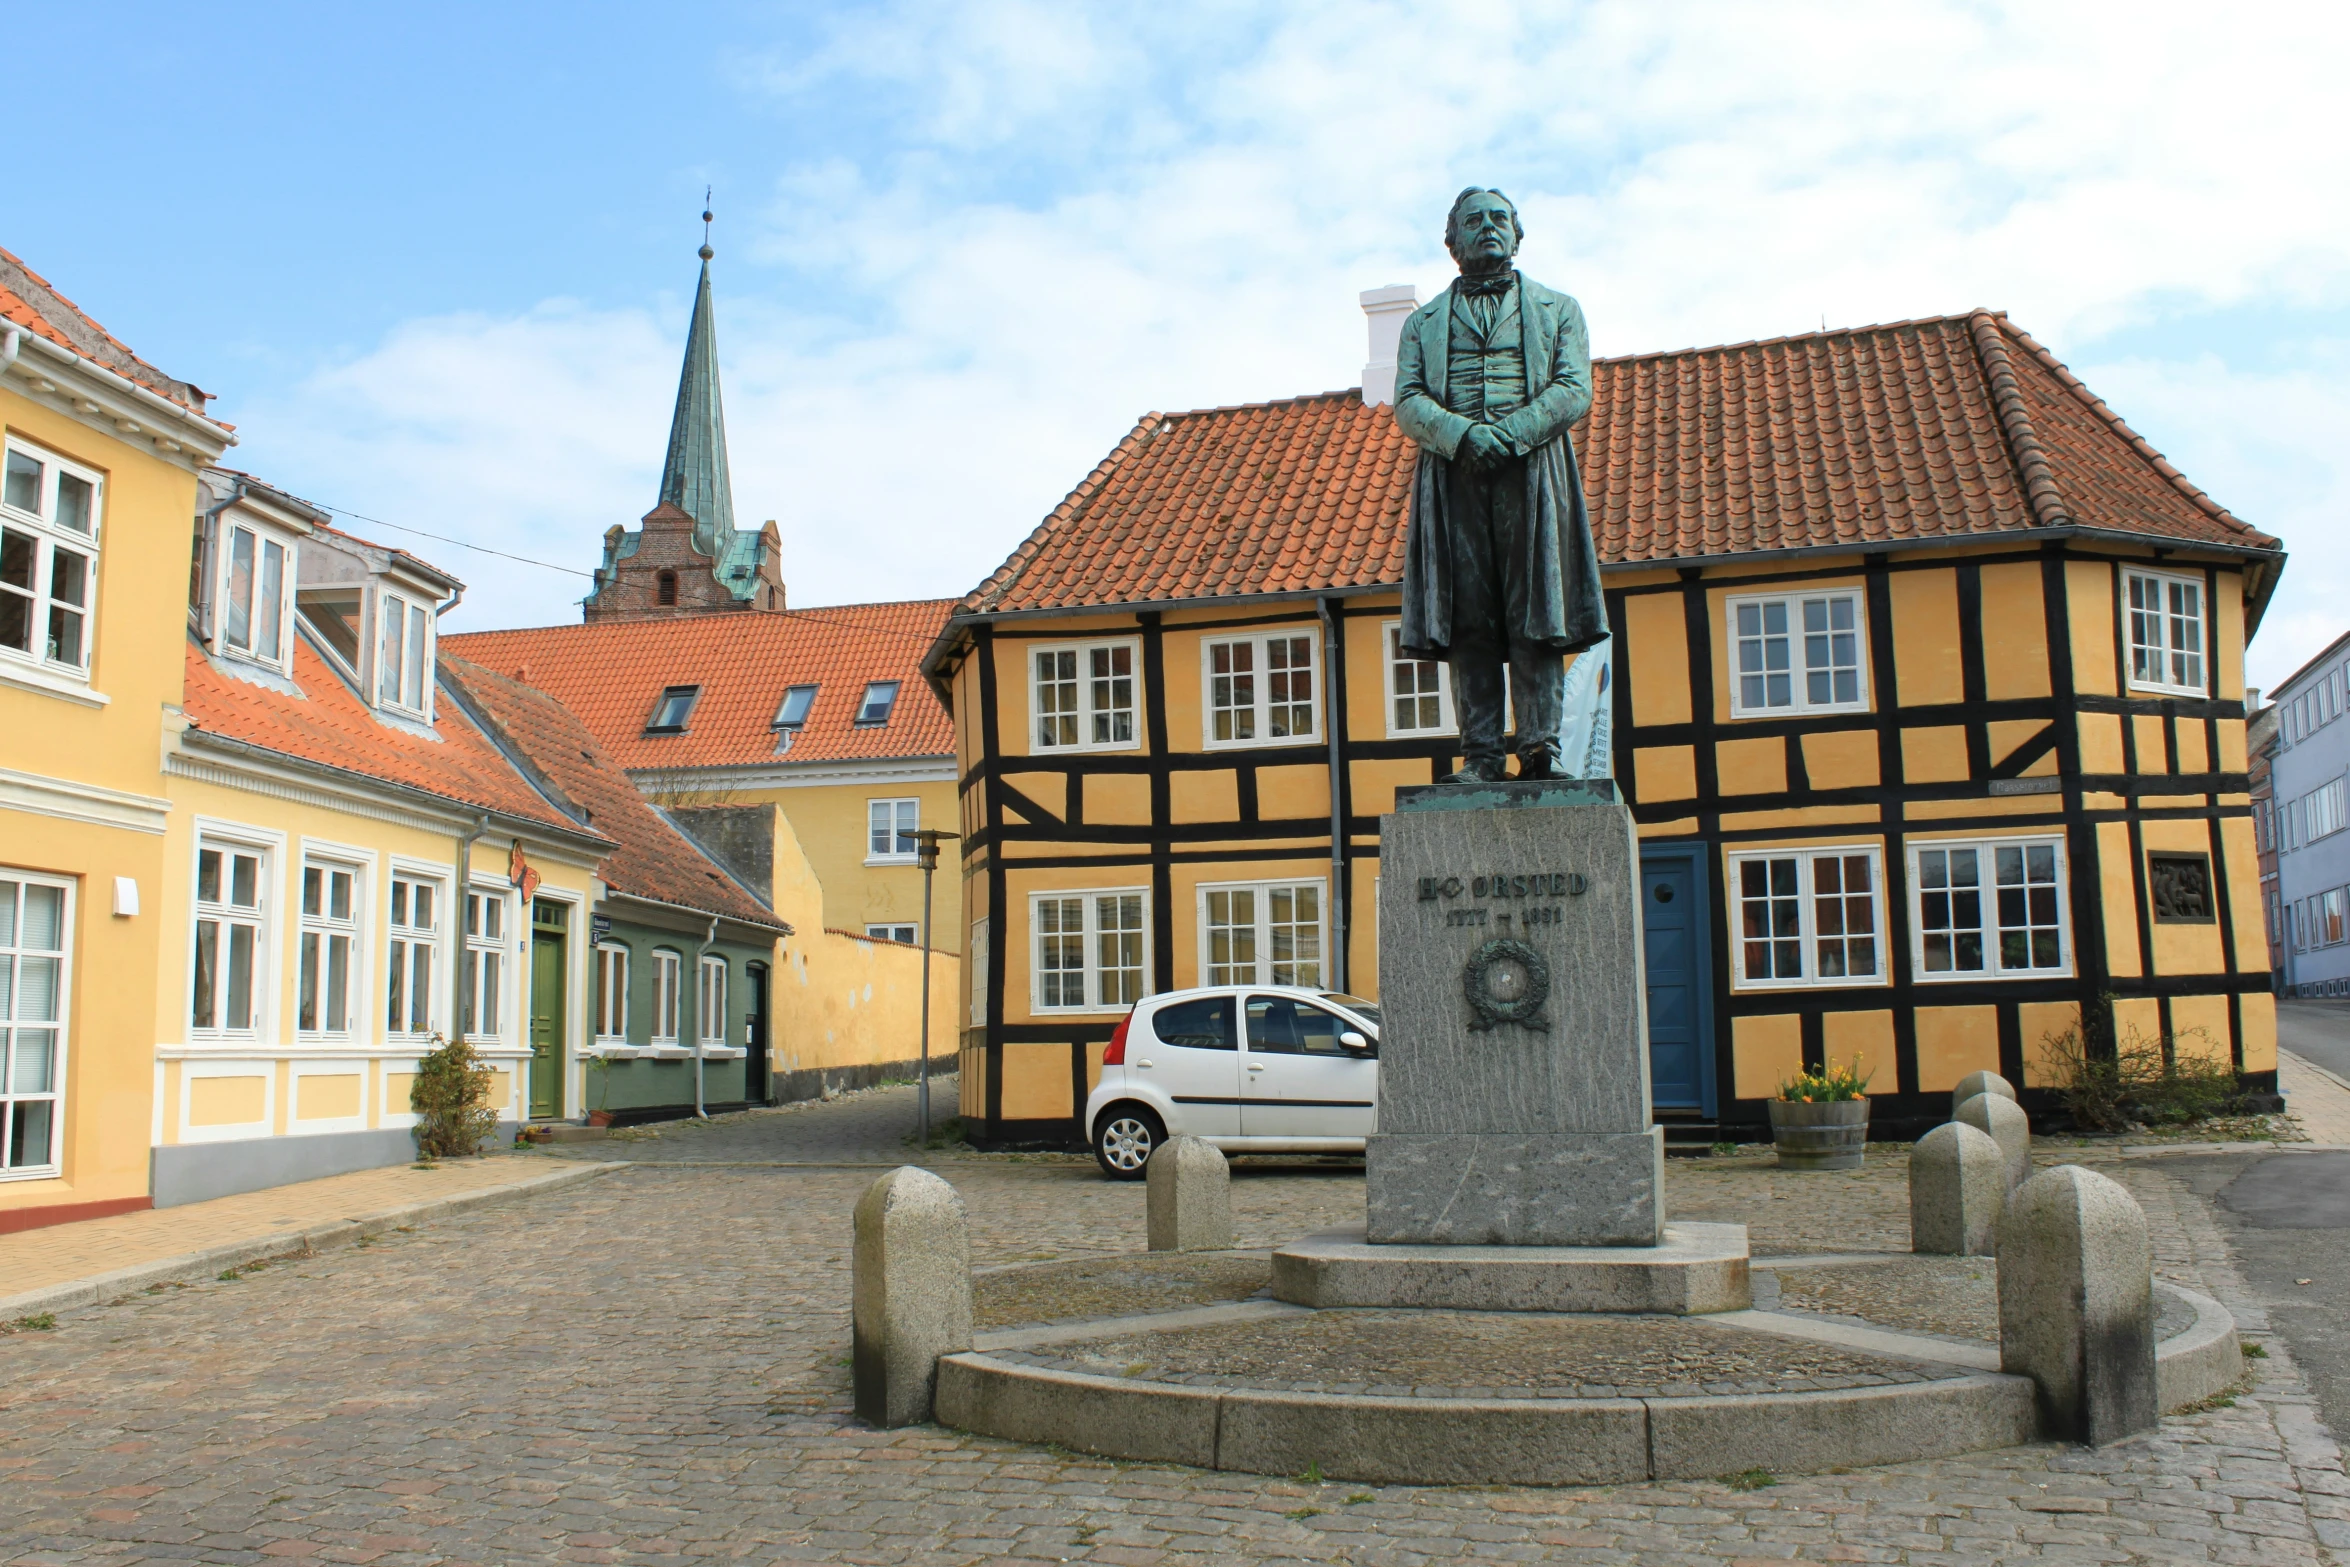 the statue is placed in the middle of a cobblestone street